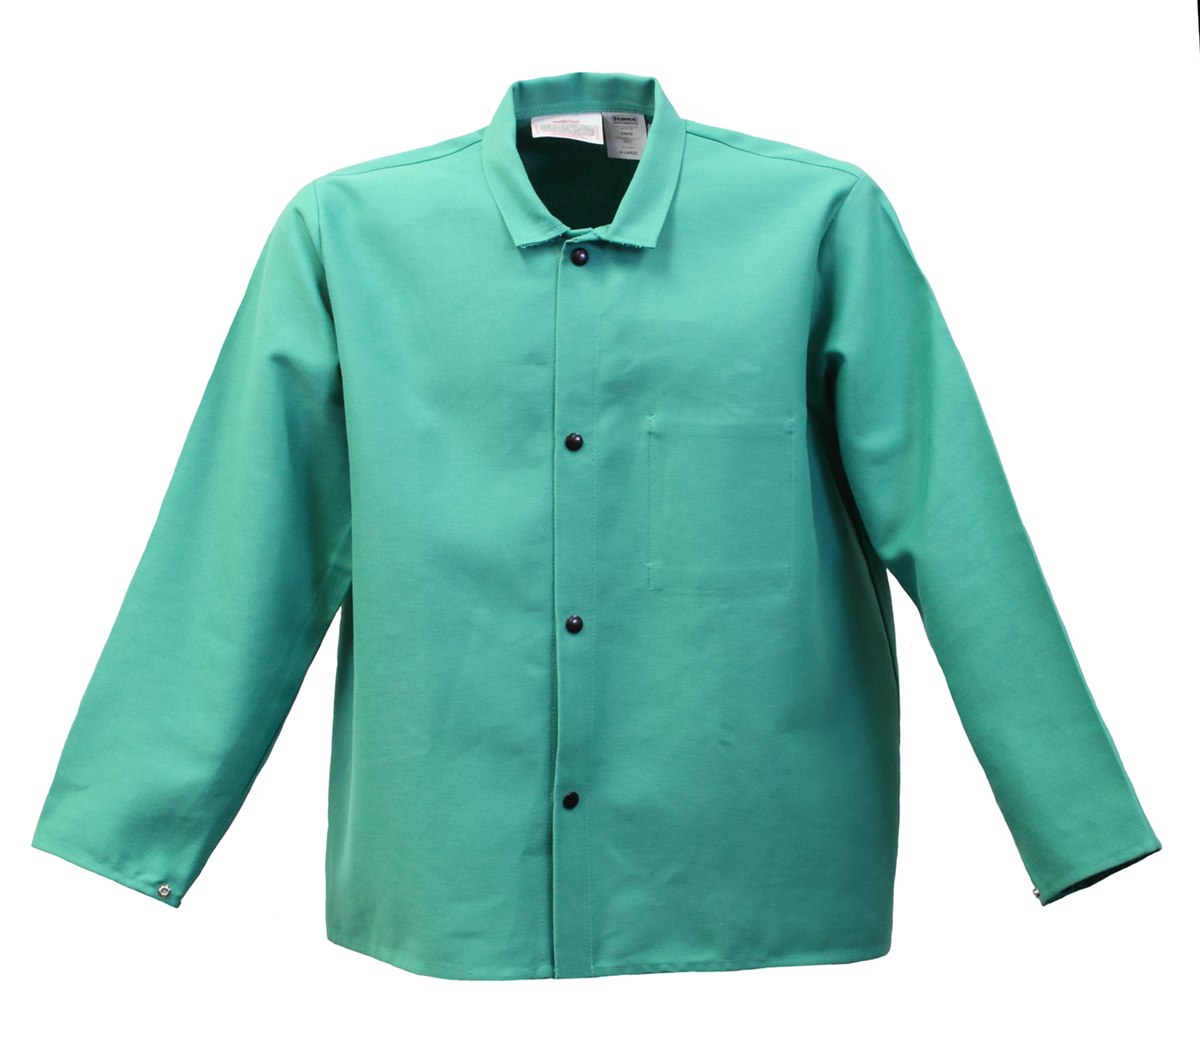 Stanco Safety Products™ Size 2X Green Cotton Flame Resistant Coat With Snap Closure